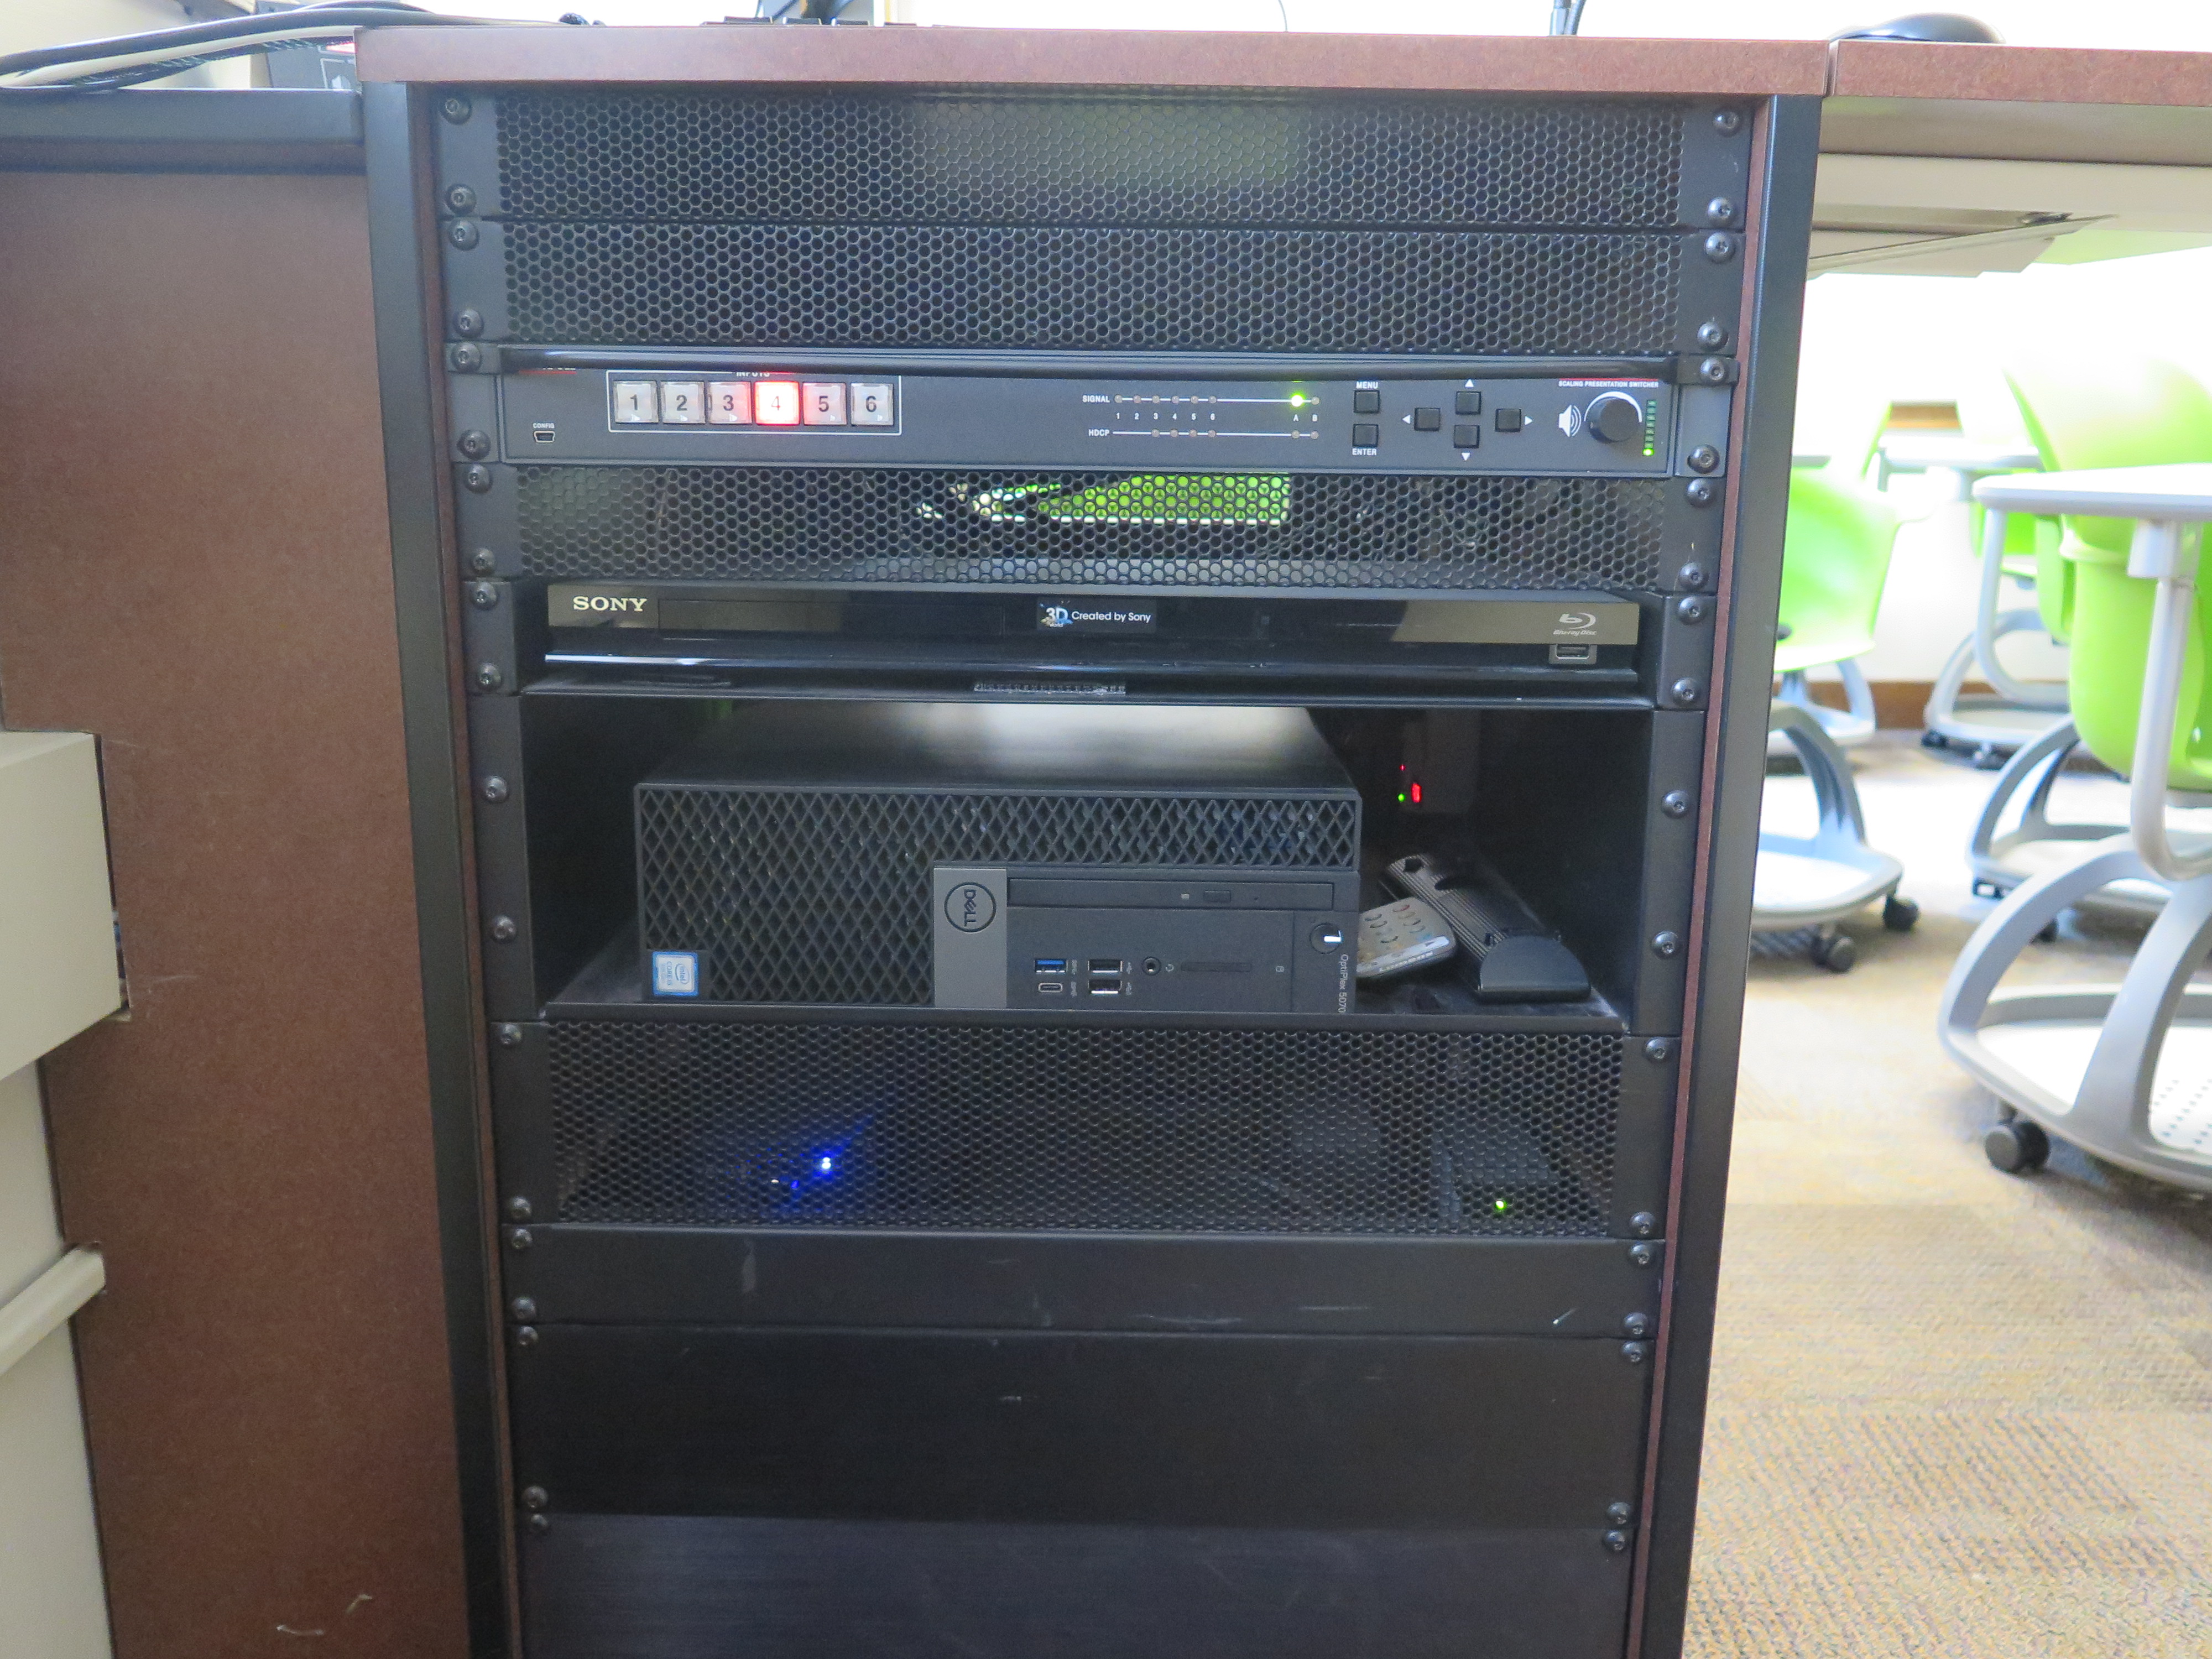 Front of Equipment rack showing AV Switcher. Below that is Blue-Ray/DVD Player. On the bottom is the the Dell Computer CPU.